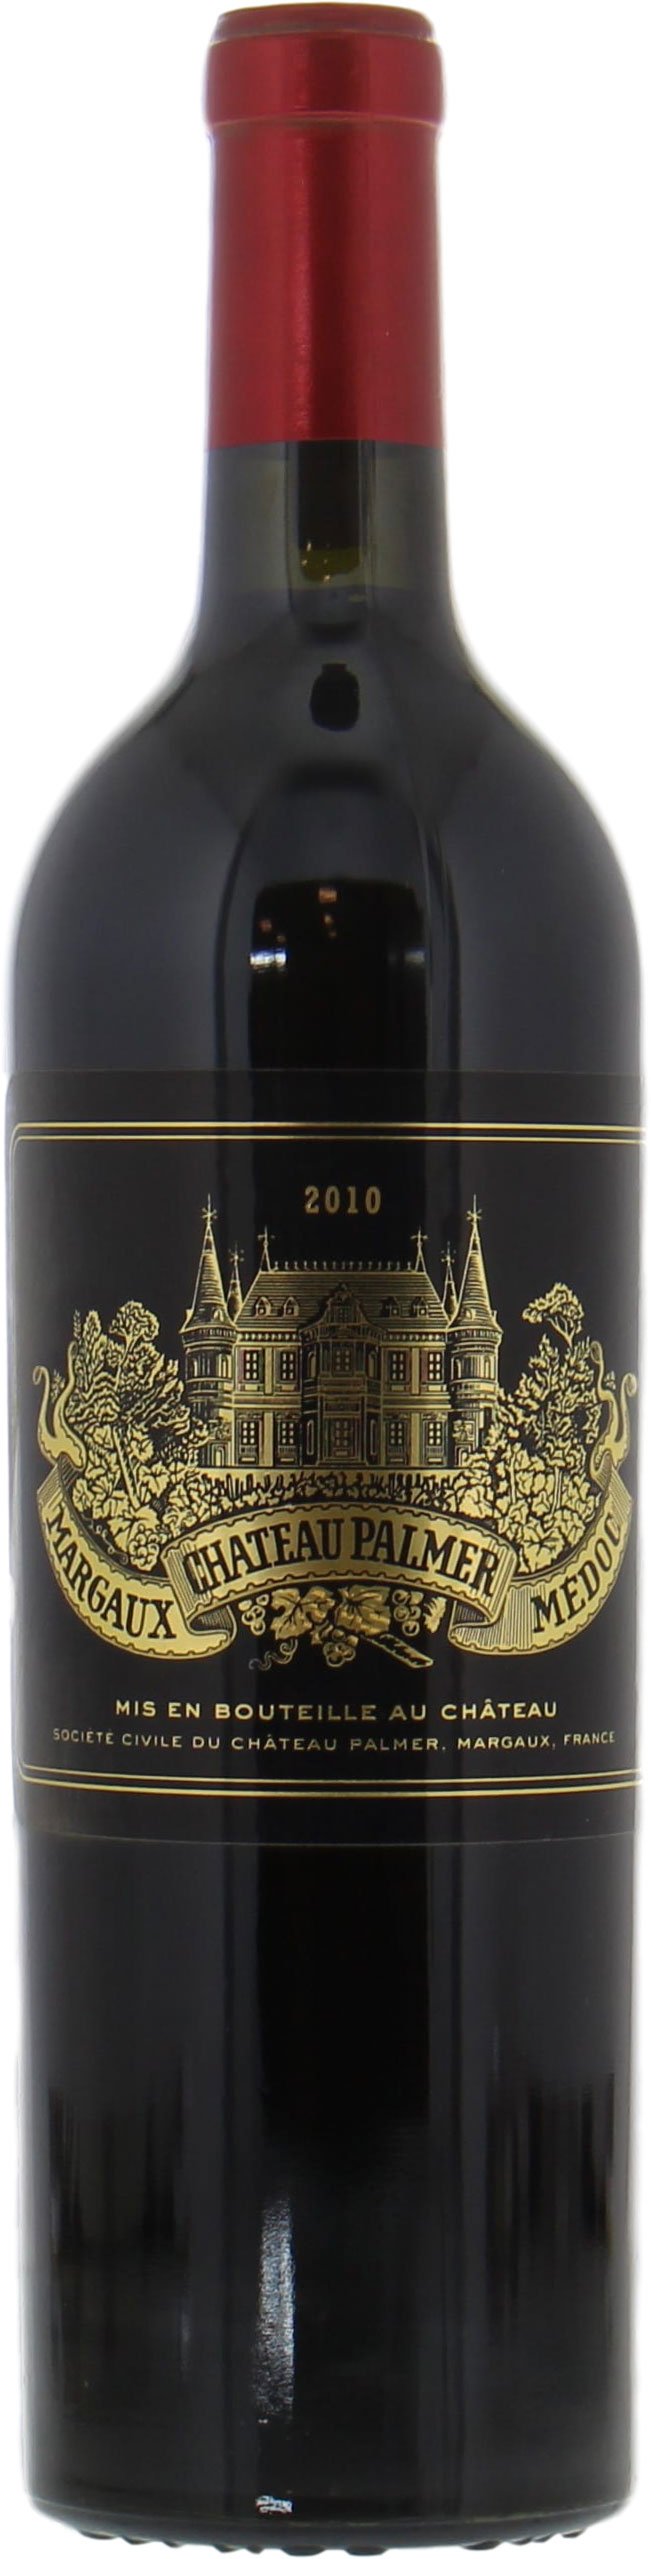 Chateau Palmer - Chateau Palmer 2010 From Original Wooden Case